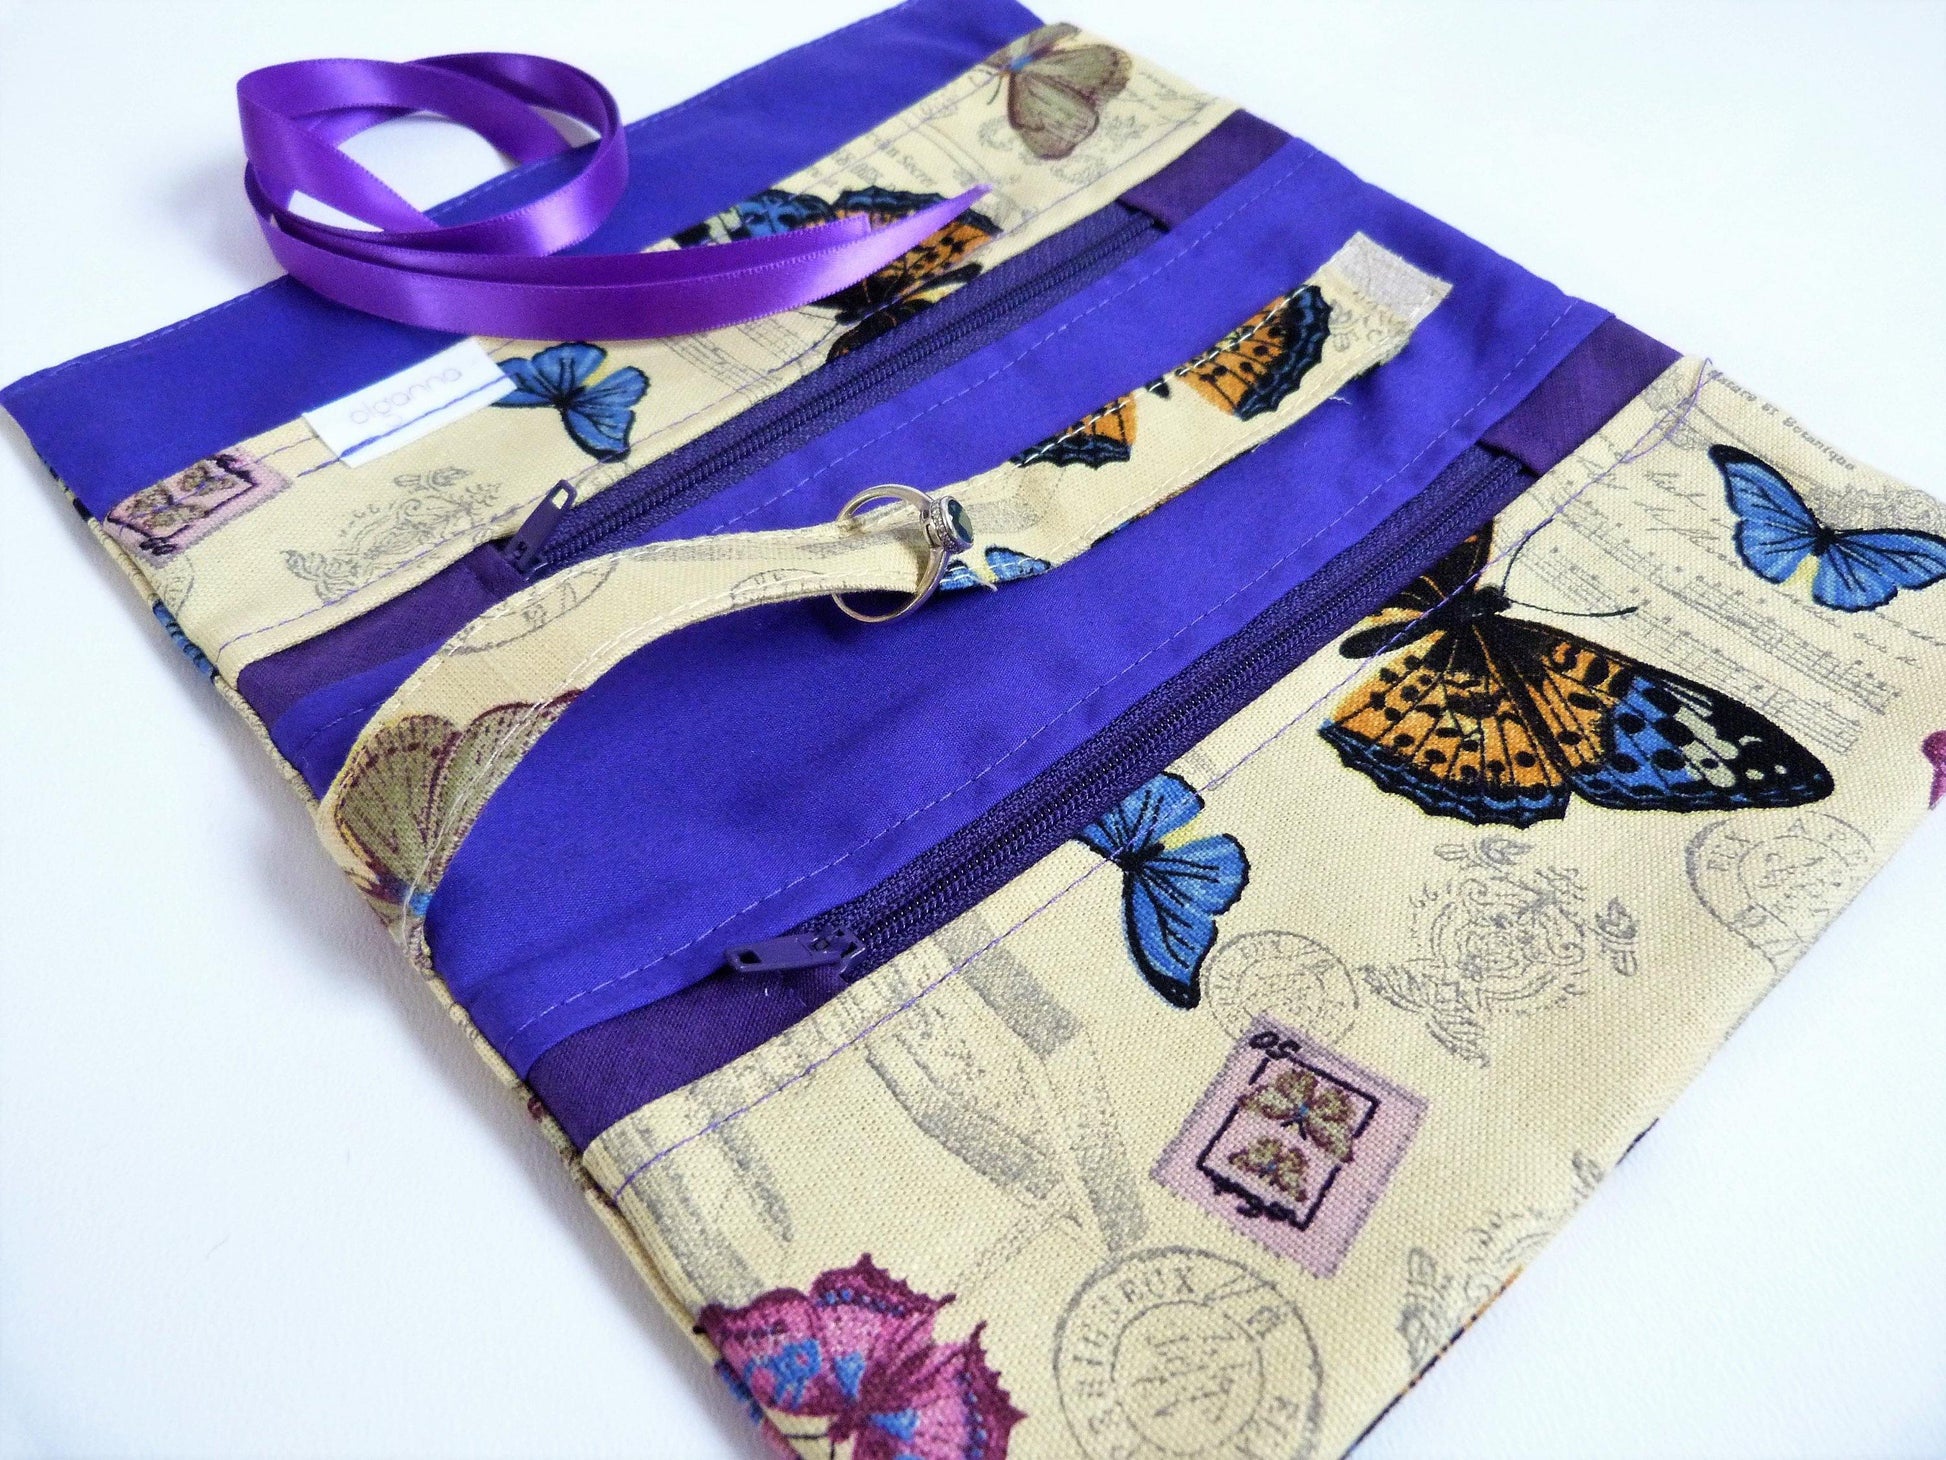 Make Up Gift set, Jewelry Roll and Make Up Wrap - Olganna